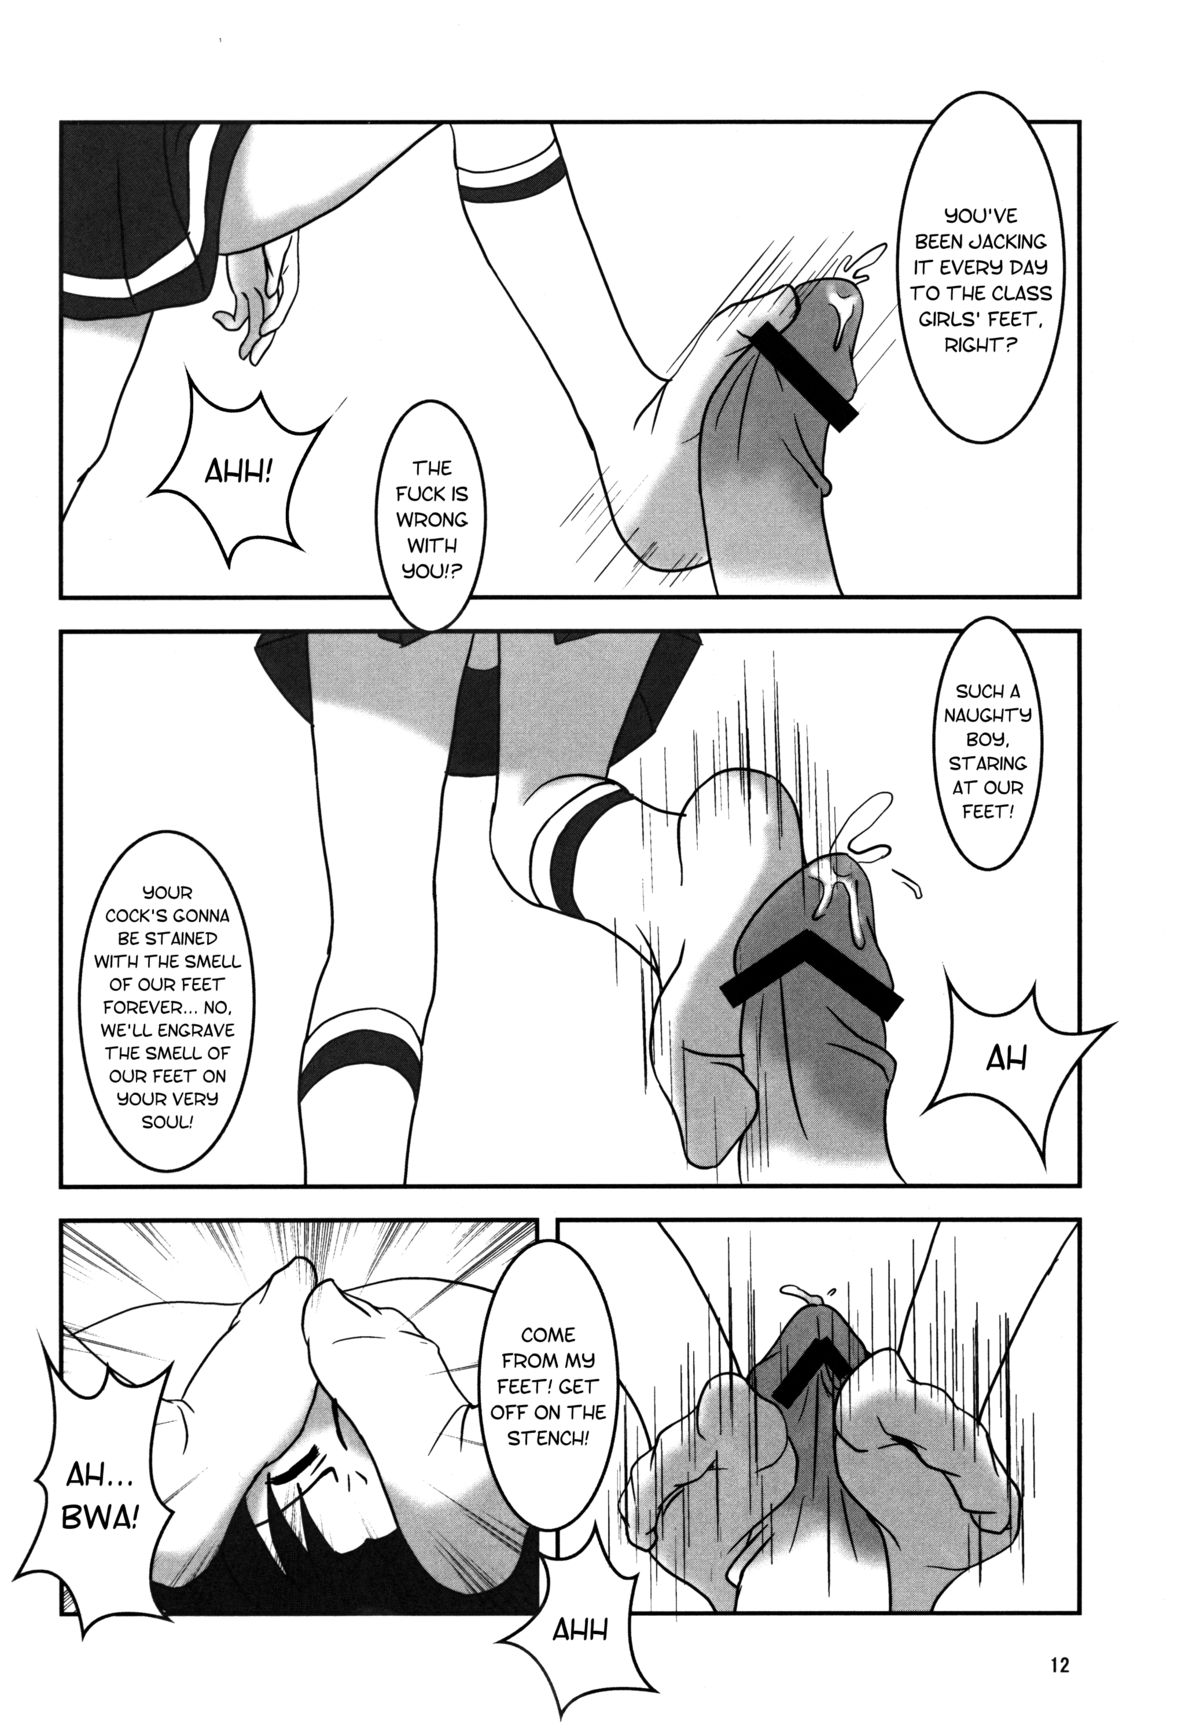 (C82) [AFJ (Ashi_O)] Smell Zuricure | Smell Footycure (Smile Precure!) [English] page 13 full